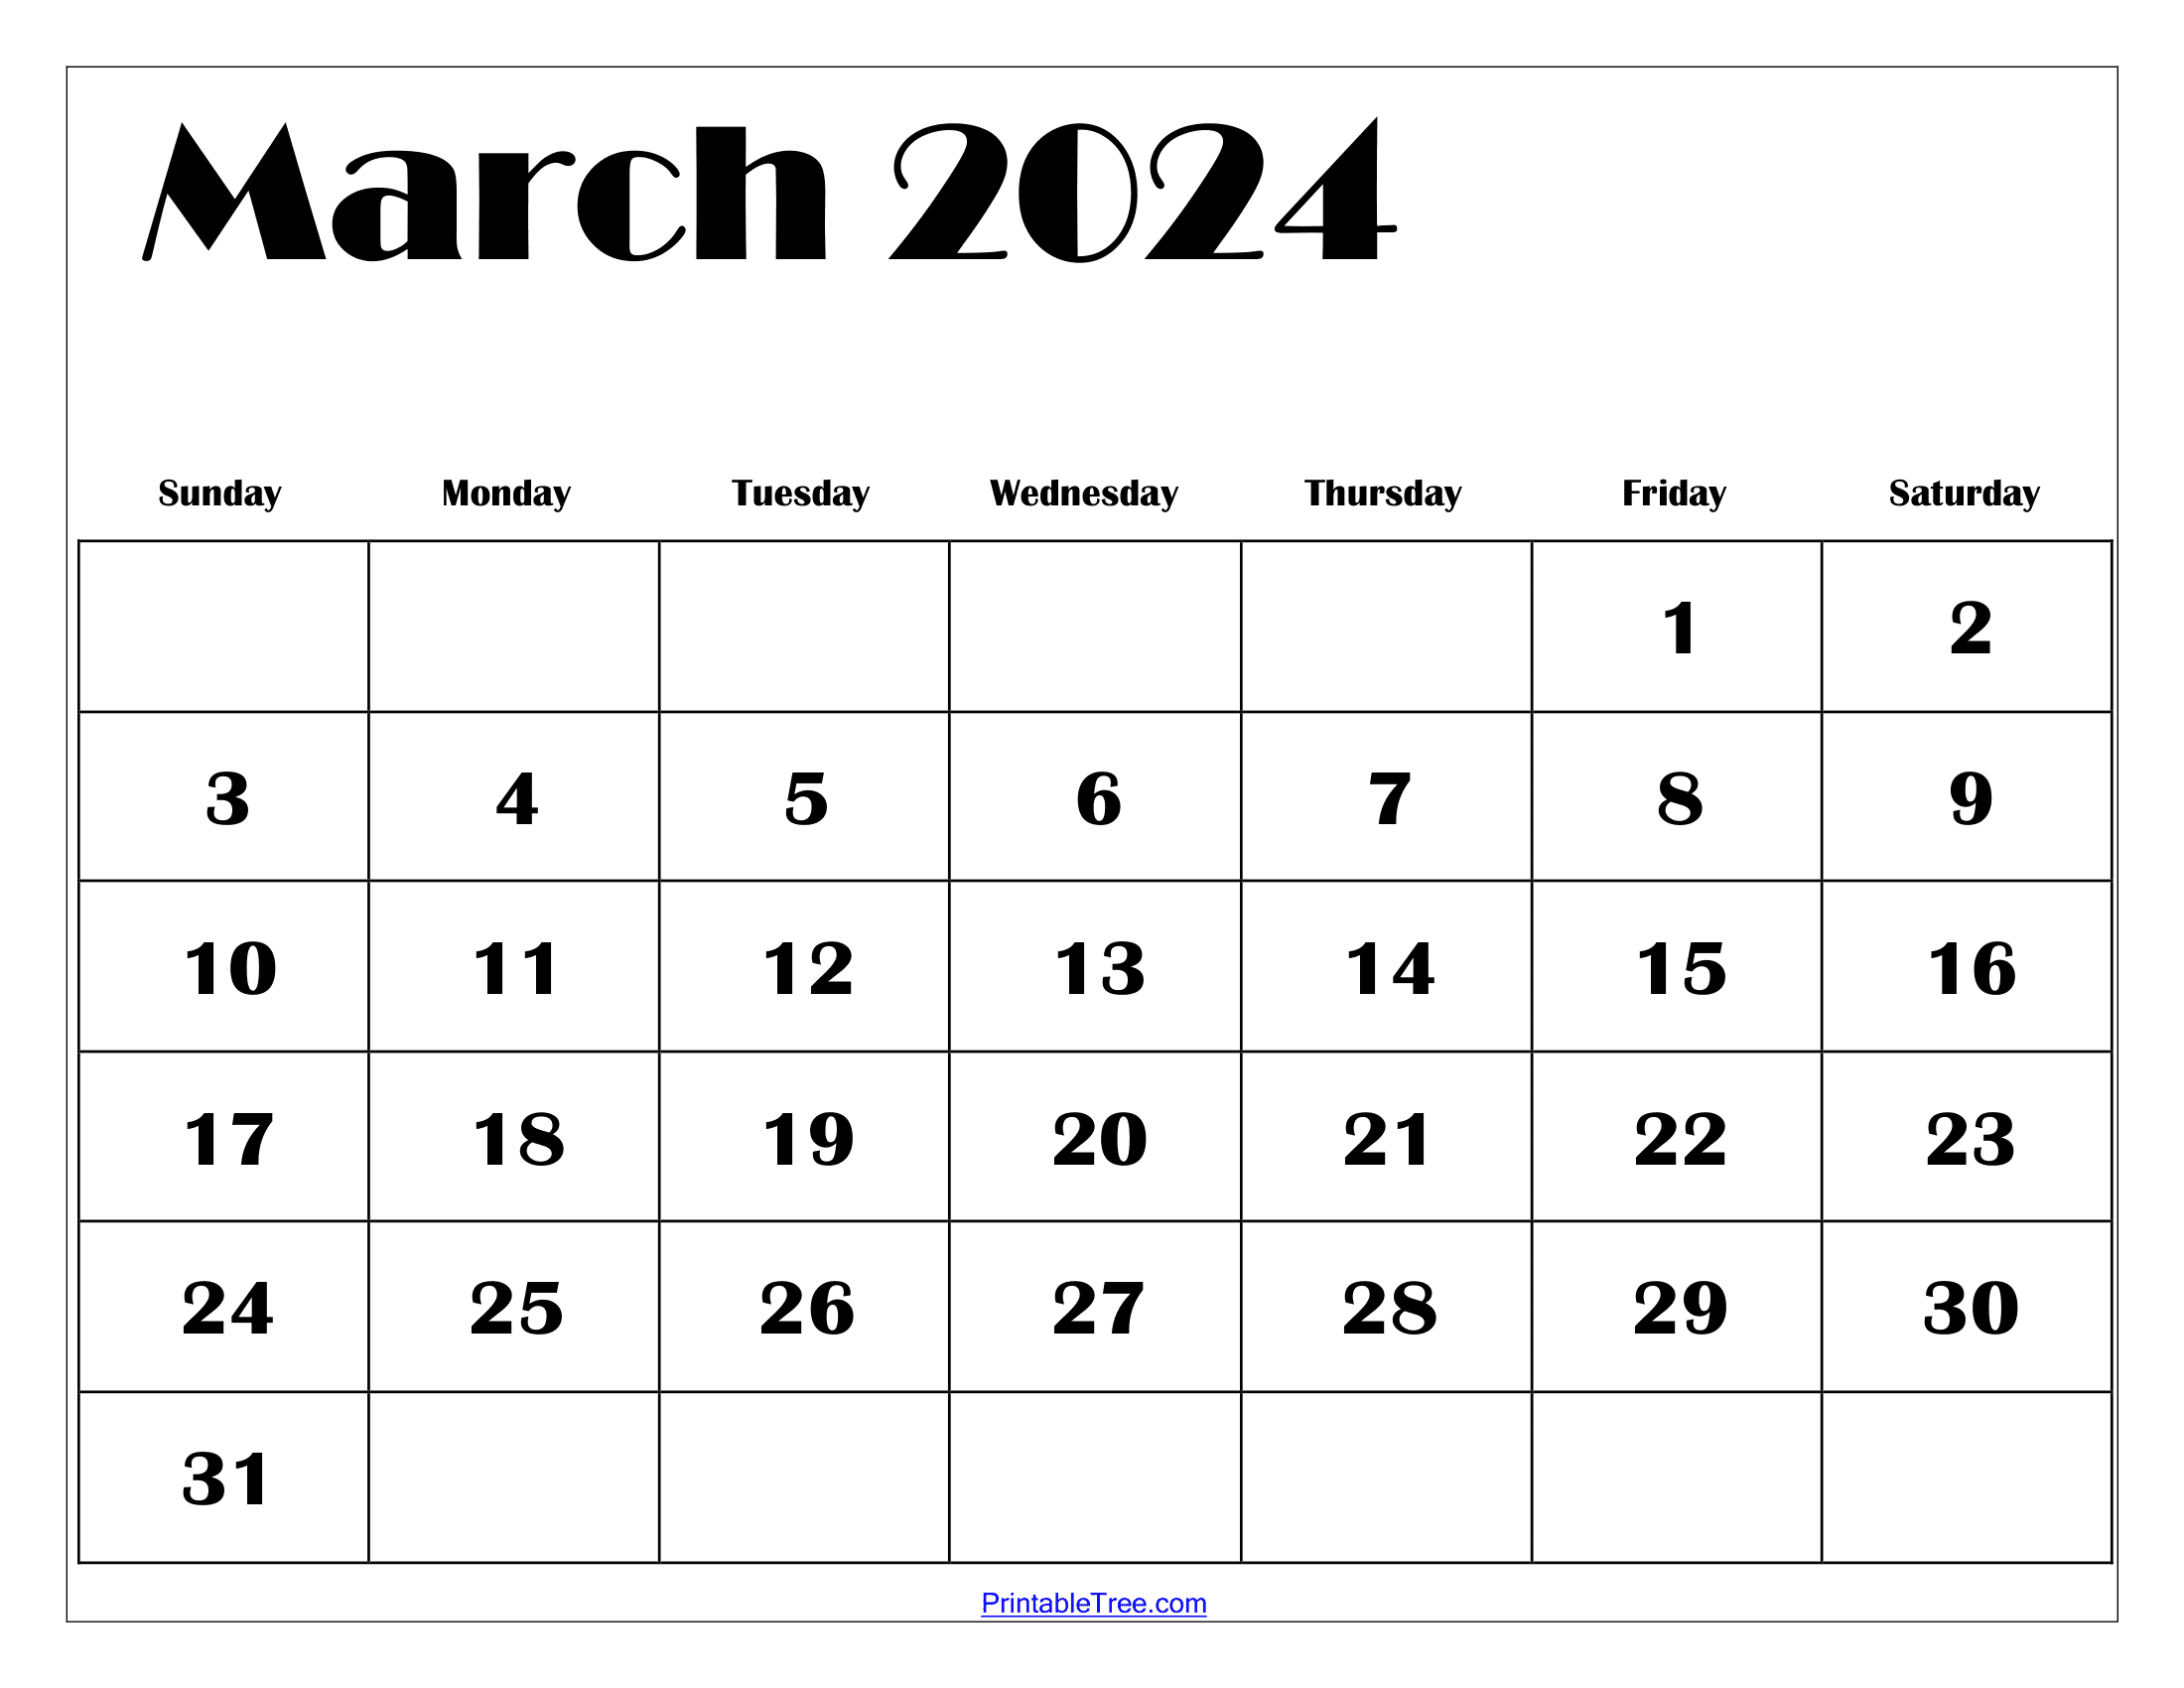 March 2024 Calendar Printable Pdf With Holidays Template Free for Printable March 2024 Calendar Page